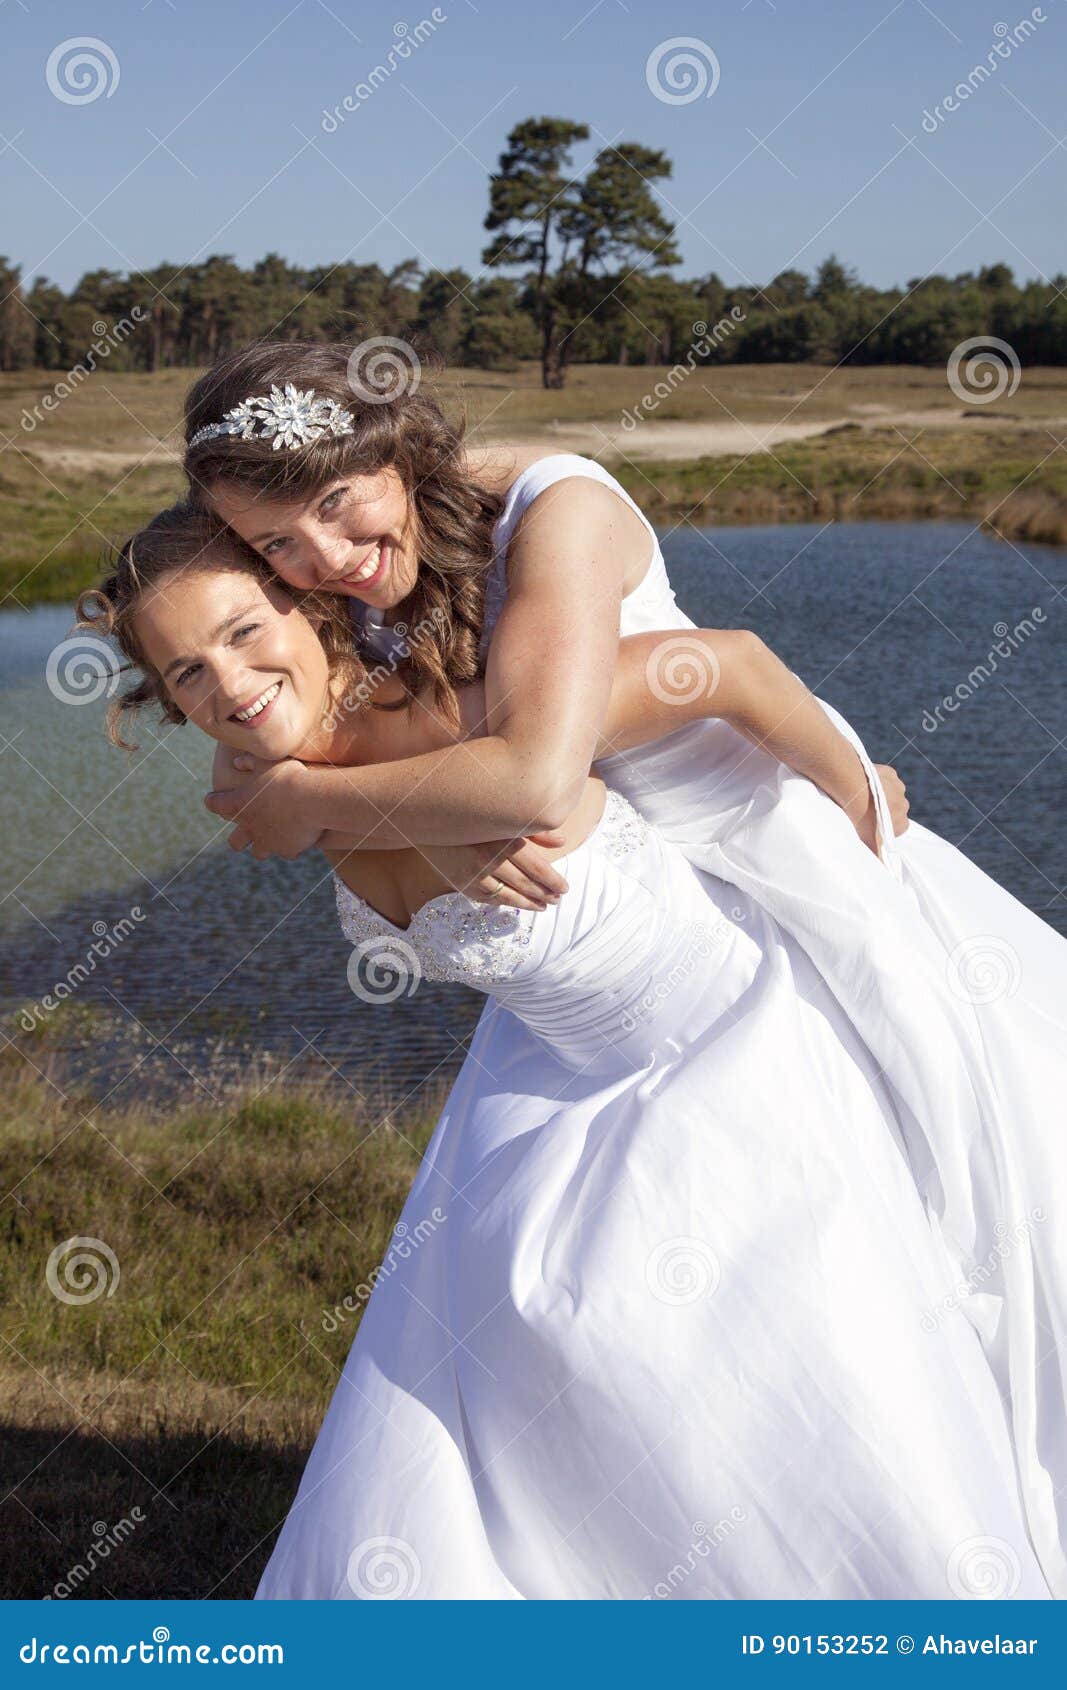 Just Married Happy Lesbian Couple in White Dress Embrace and Have Fun Near Small Lake Stock Photo image